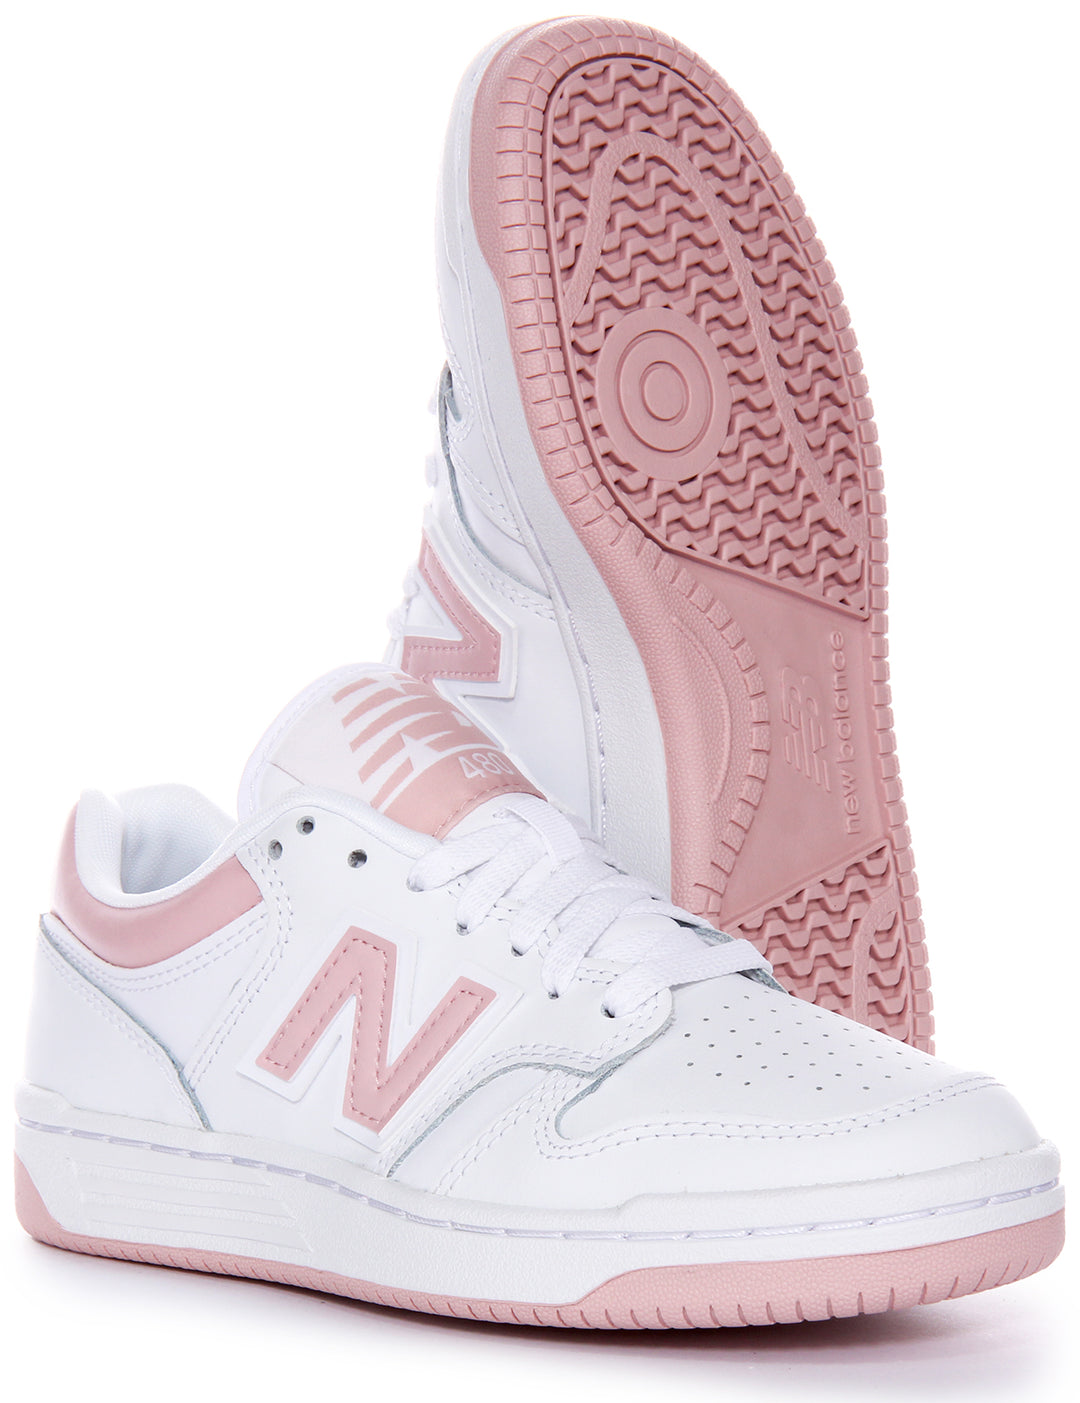 New Balance BB 480 LOP Trainers In White Pink